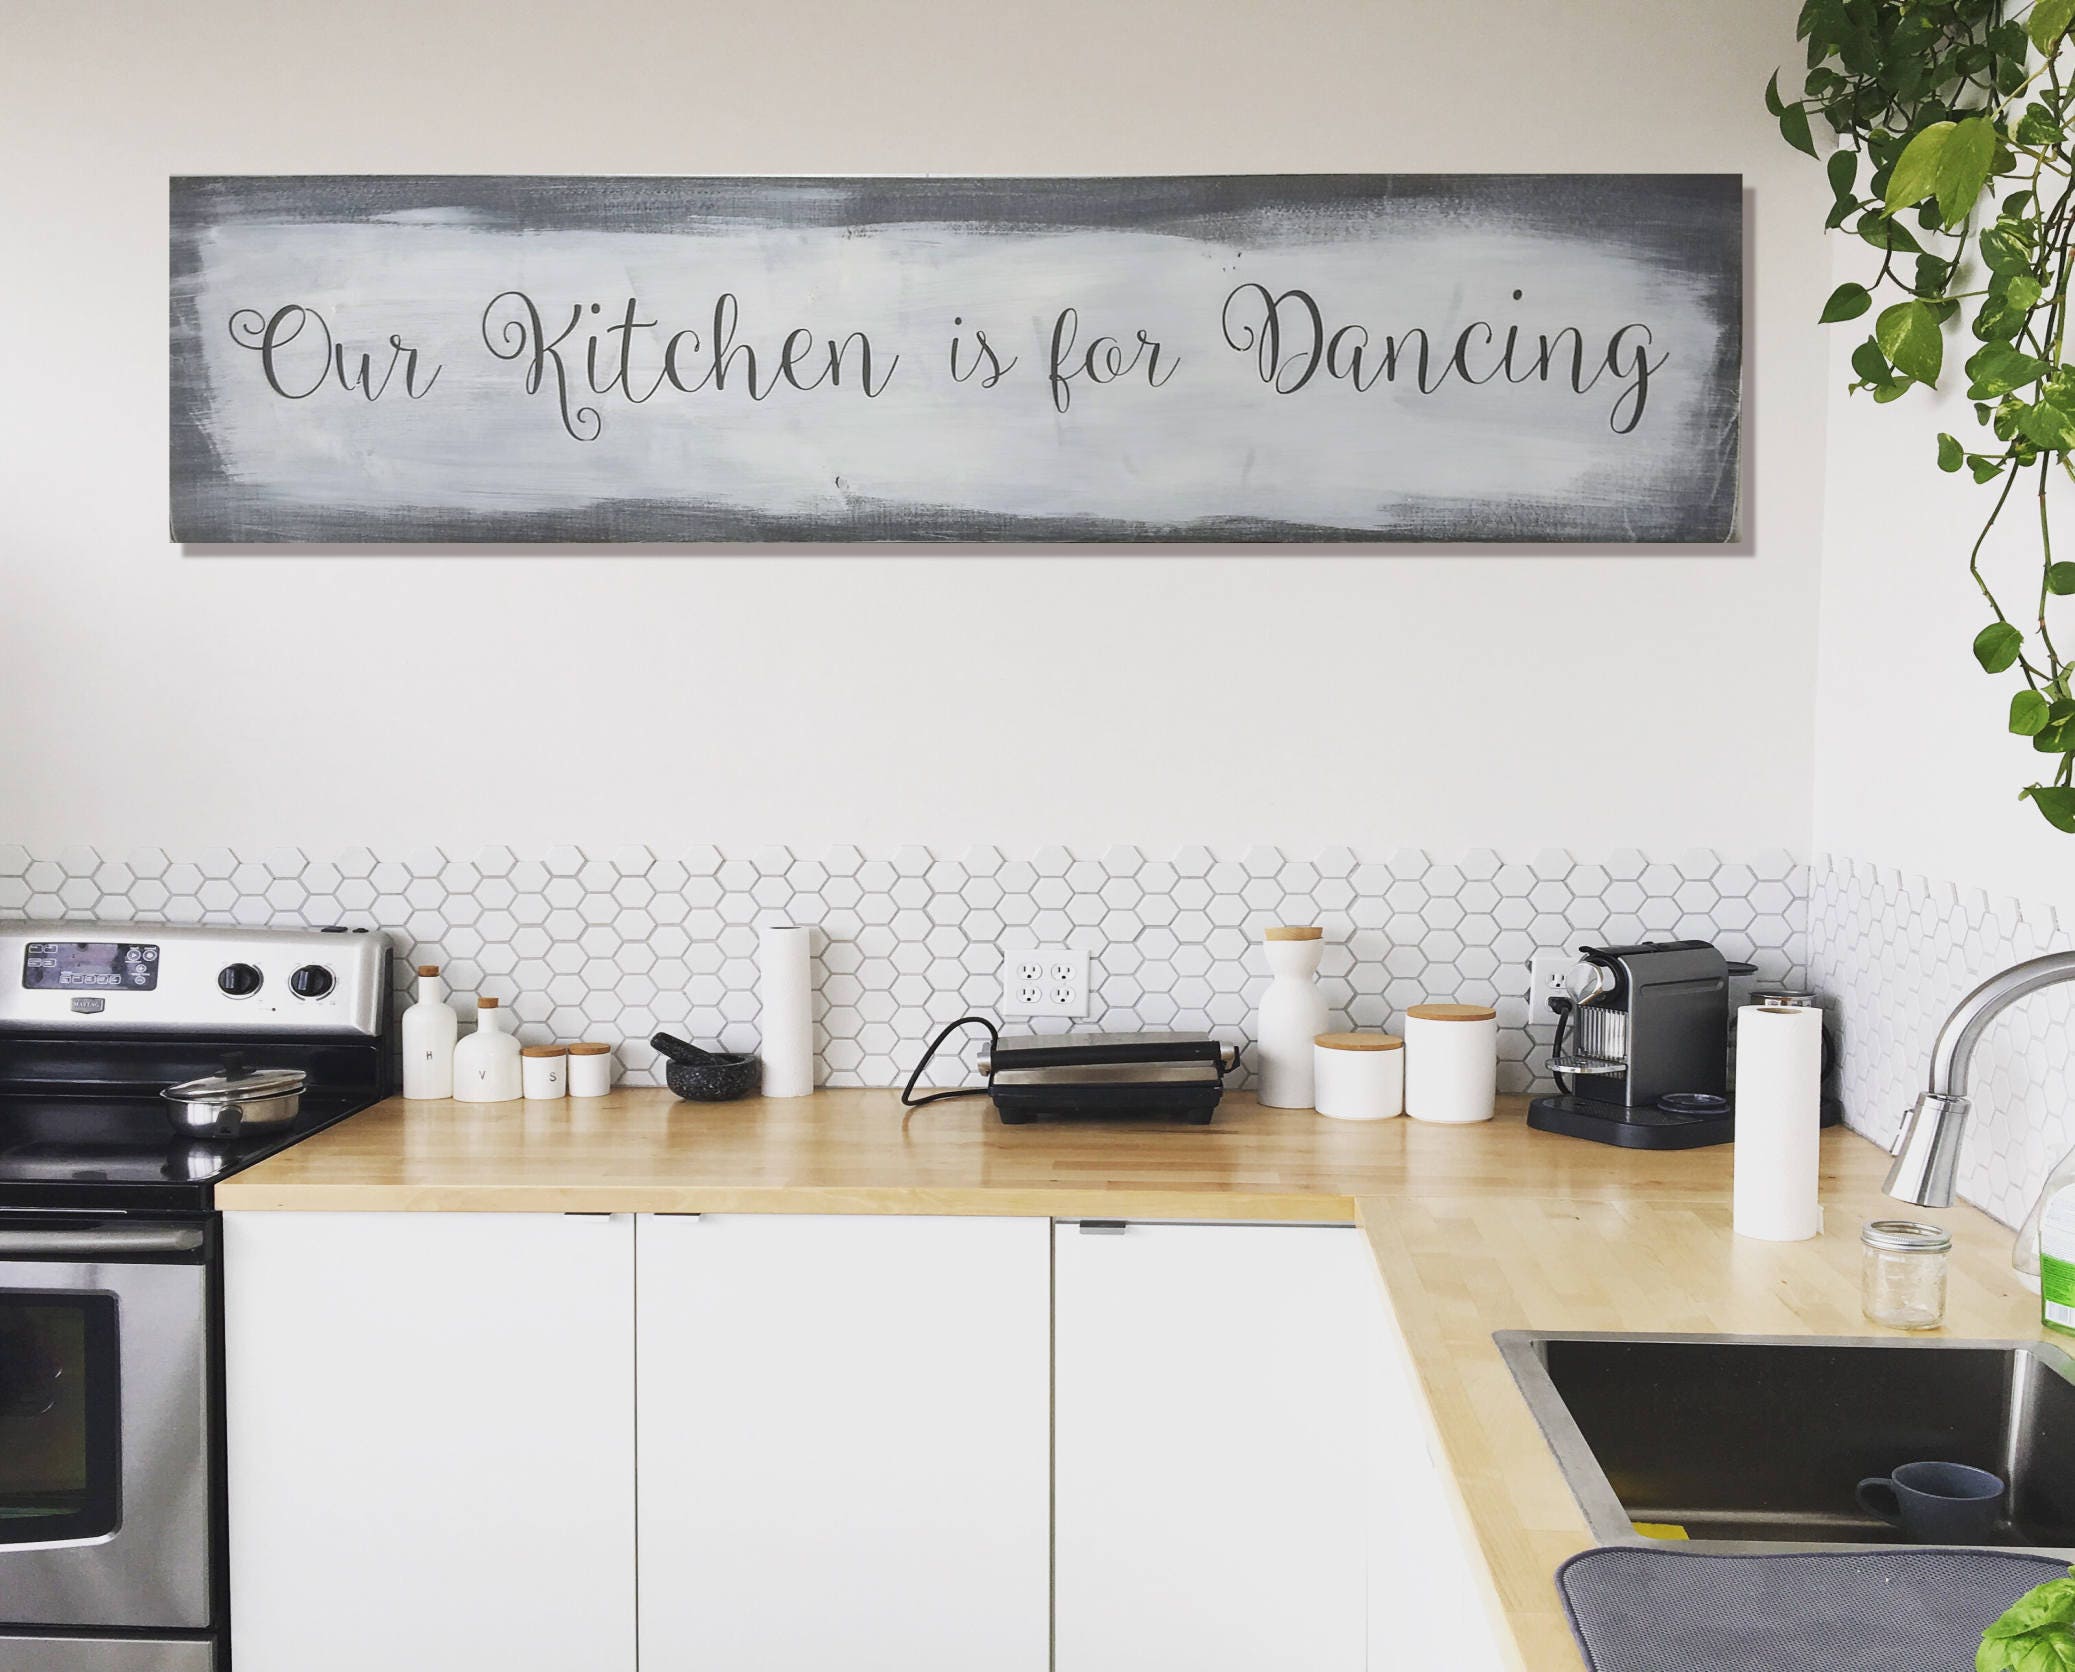 Large Kitchen Sign Kitchen is for Dancing Sign Kitchen